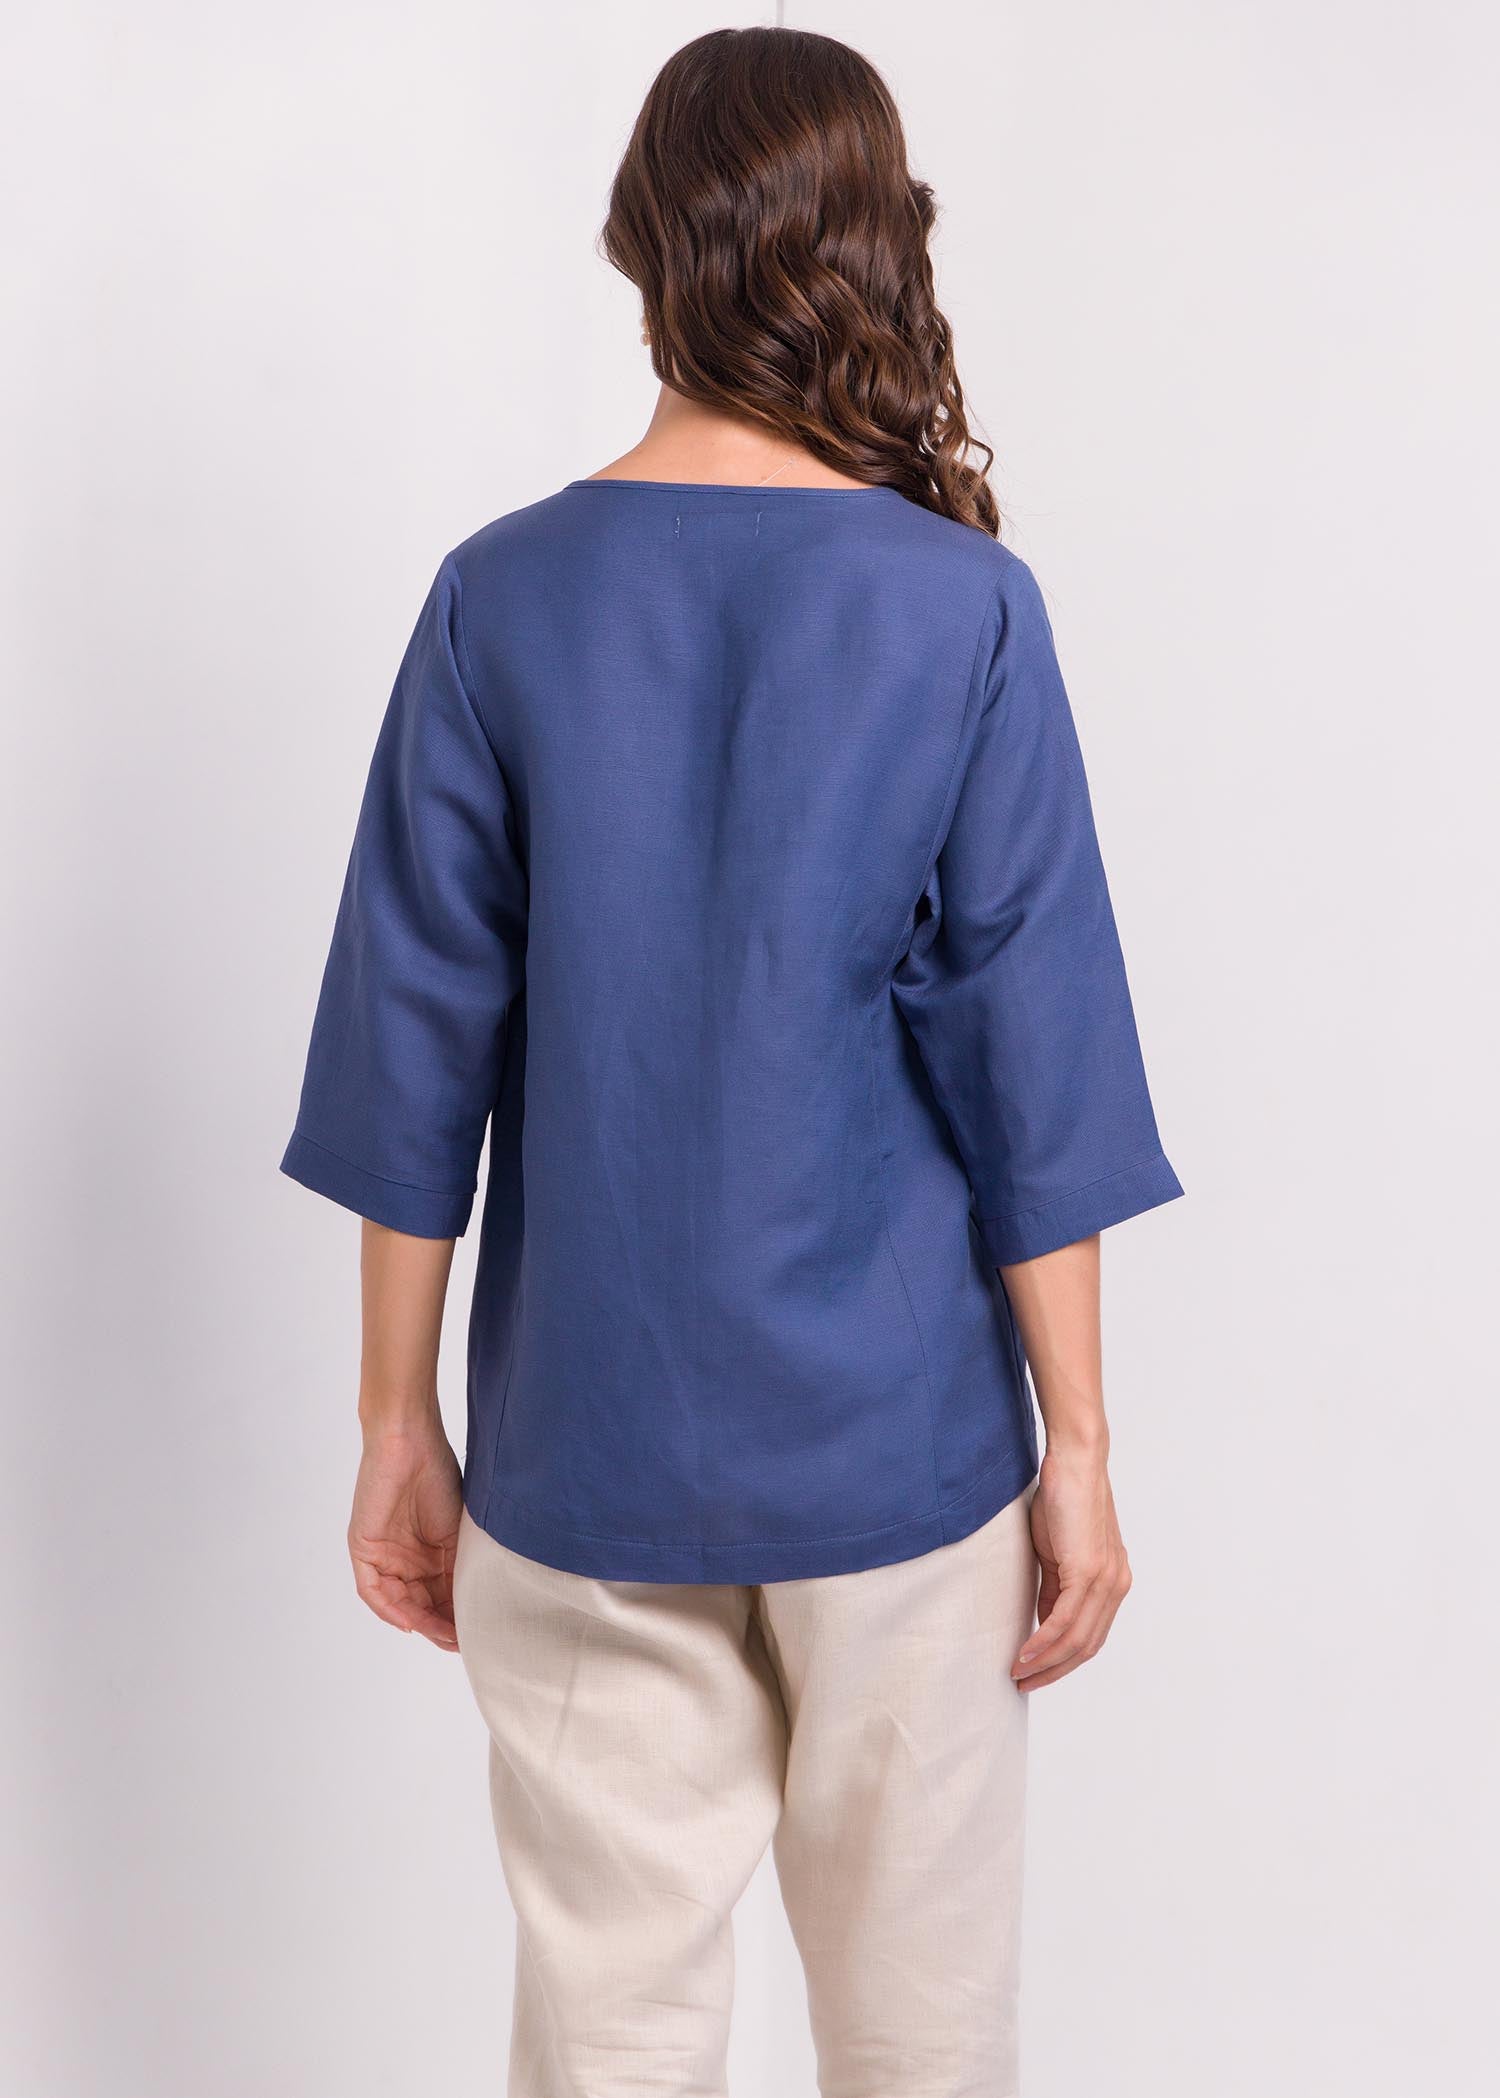 Round Neck Blouse With Short Placket